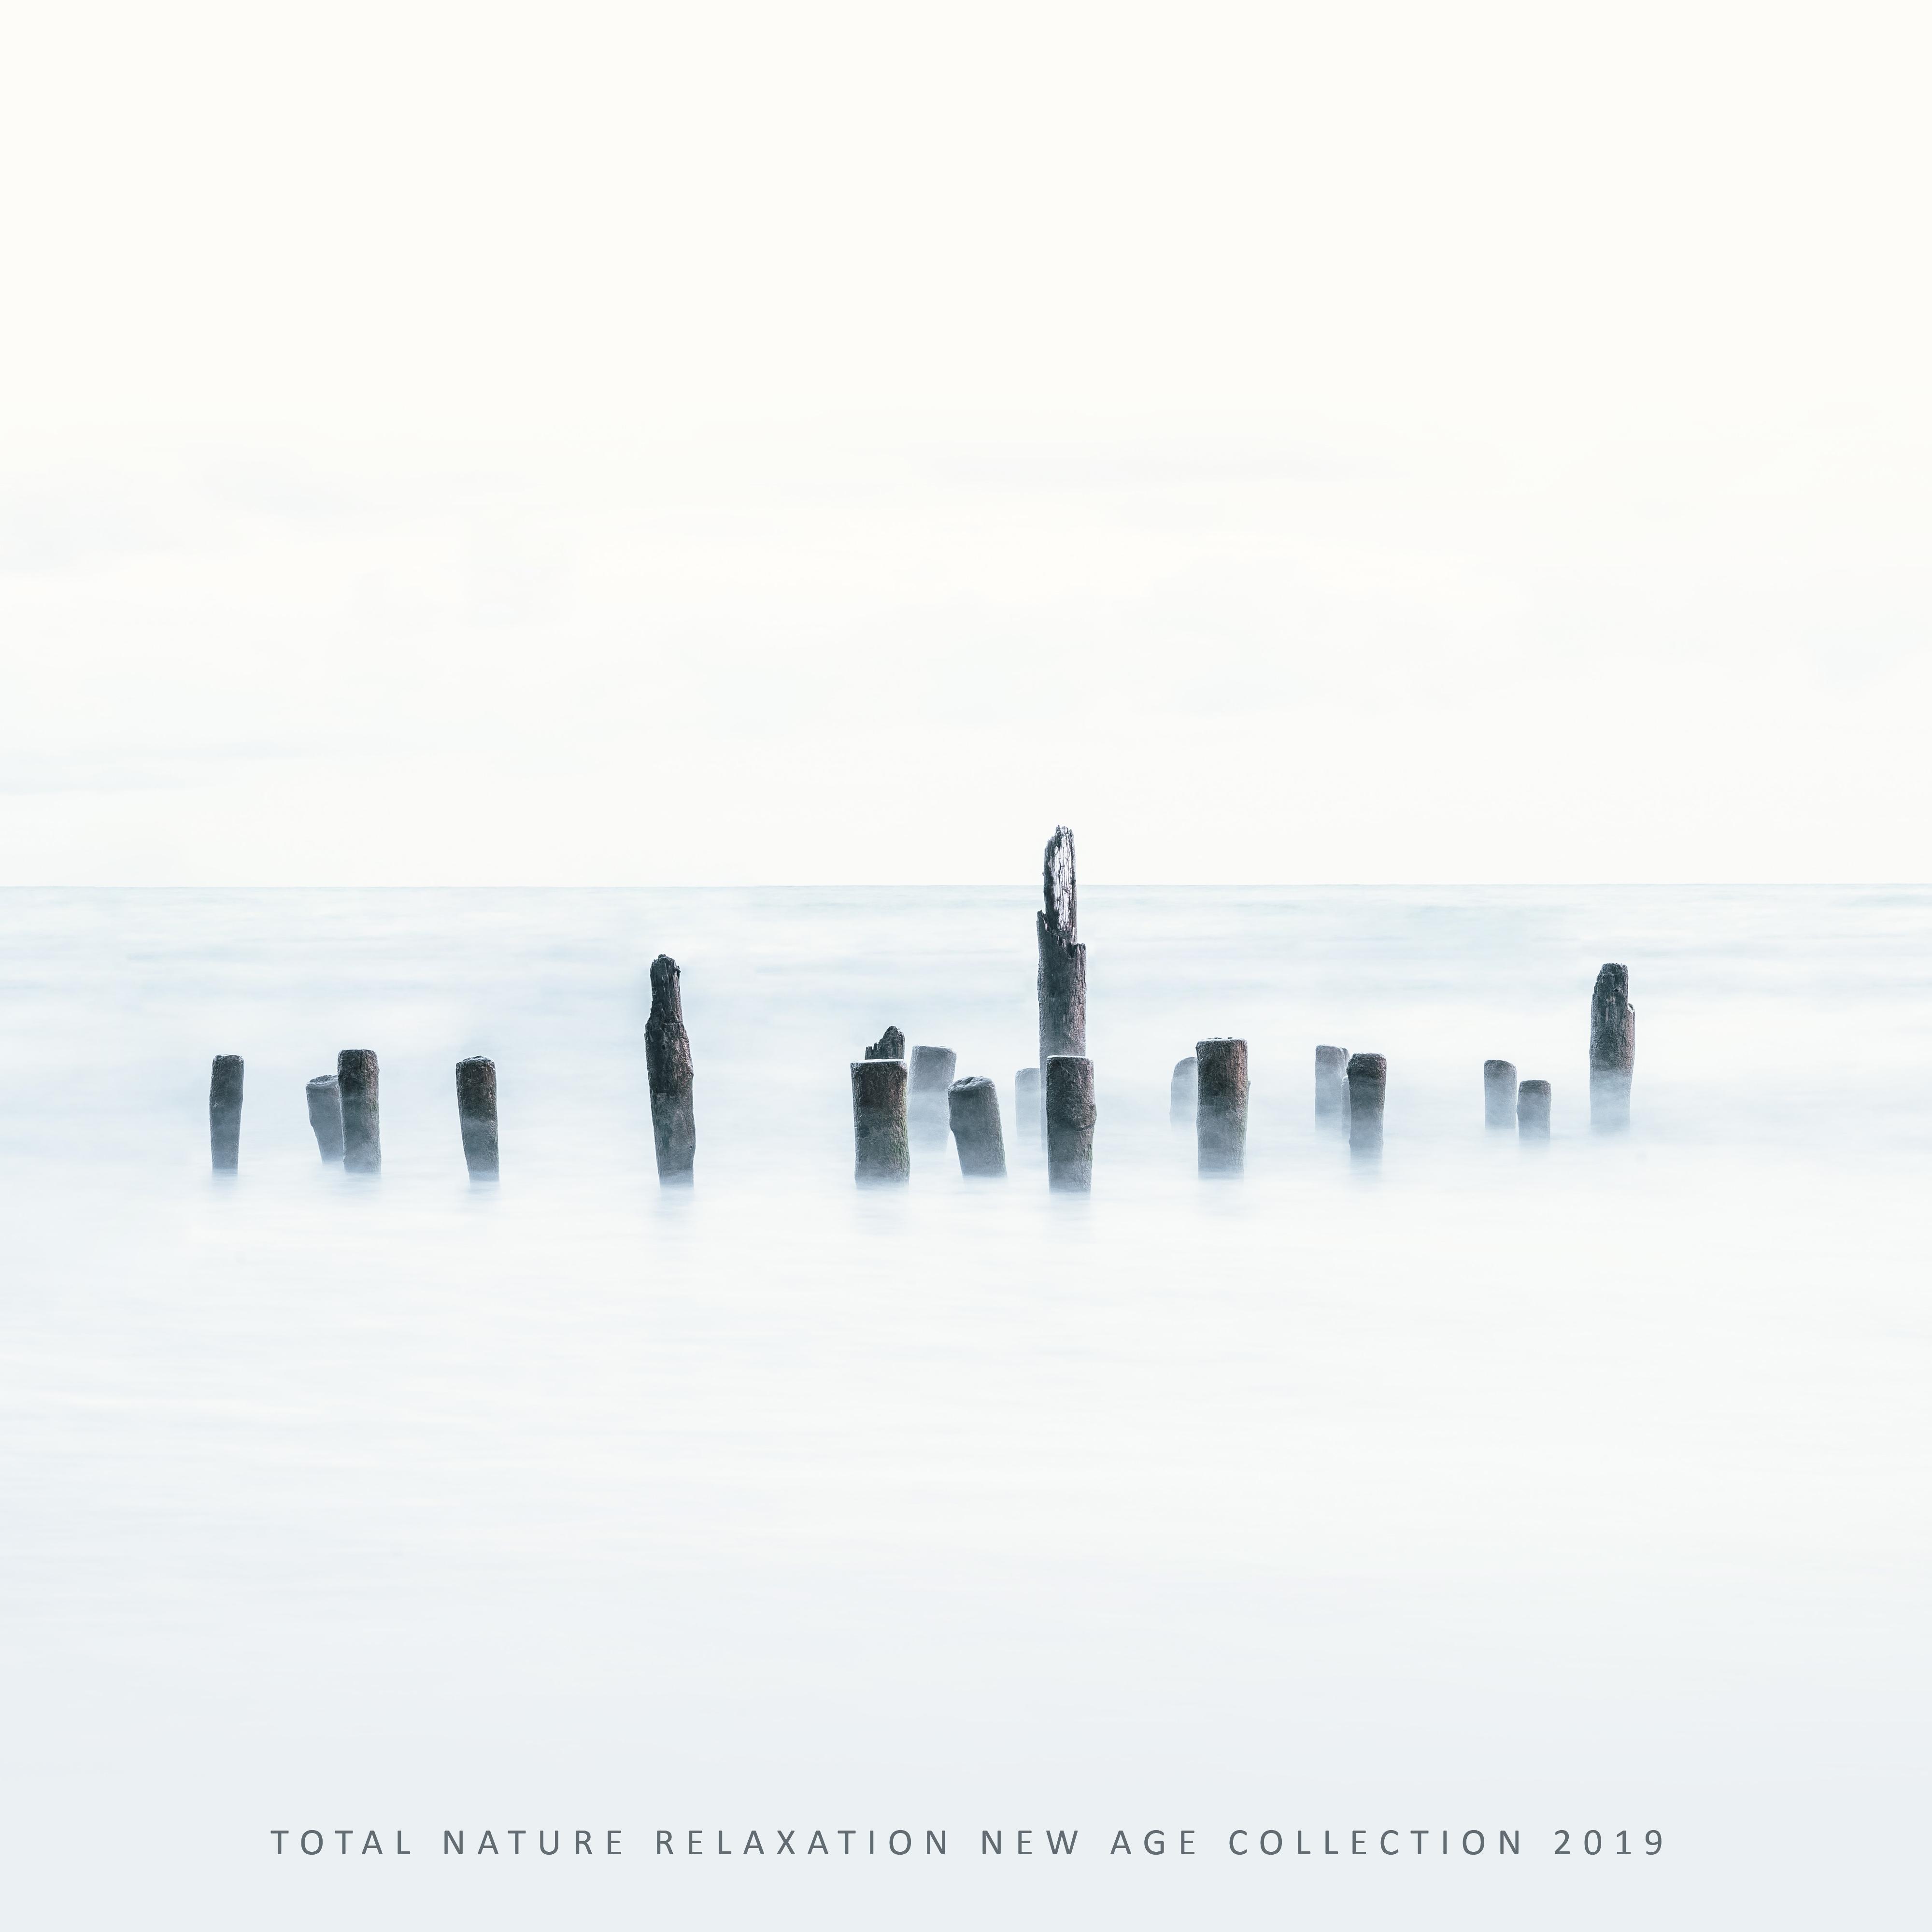 Total Nature Relaxation New Age Collection 2019